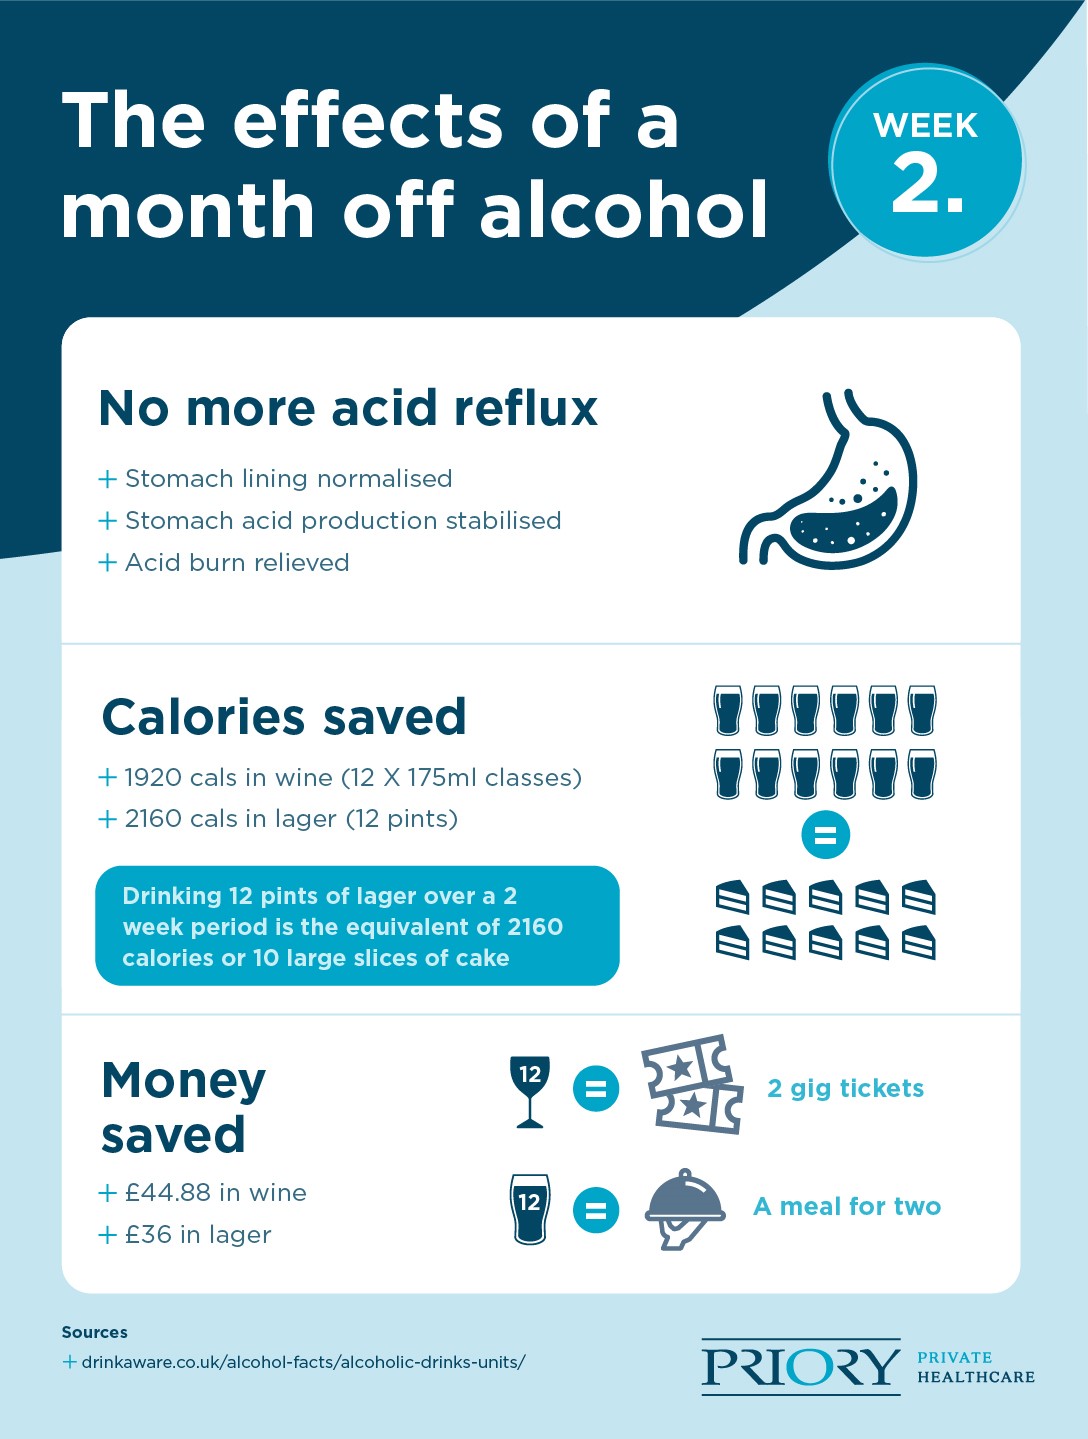 2 weeks benefits of giving up alcohol